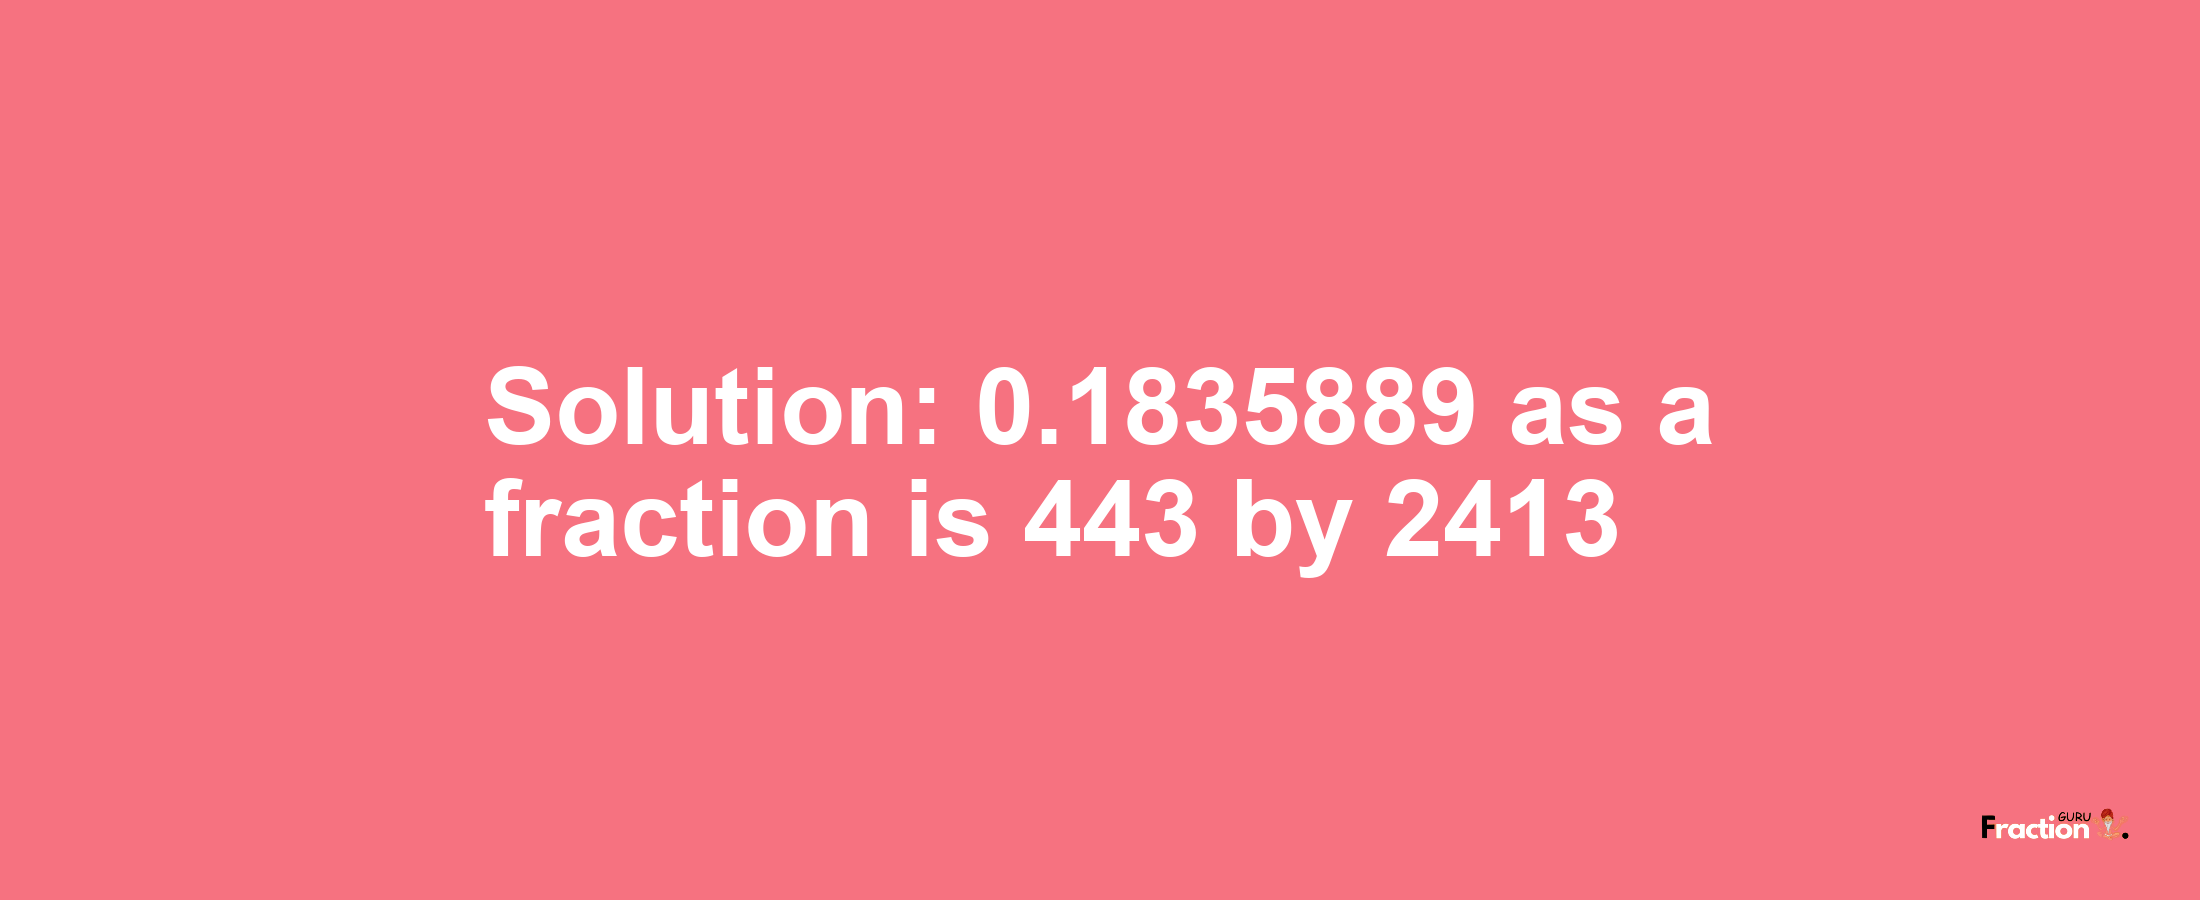 Solution:0.1835889 as a fraction is 443/2413